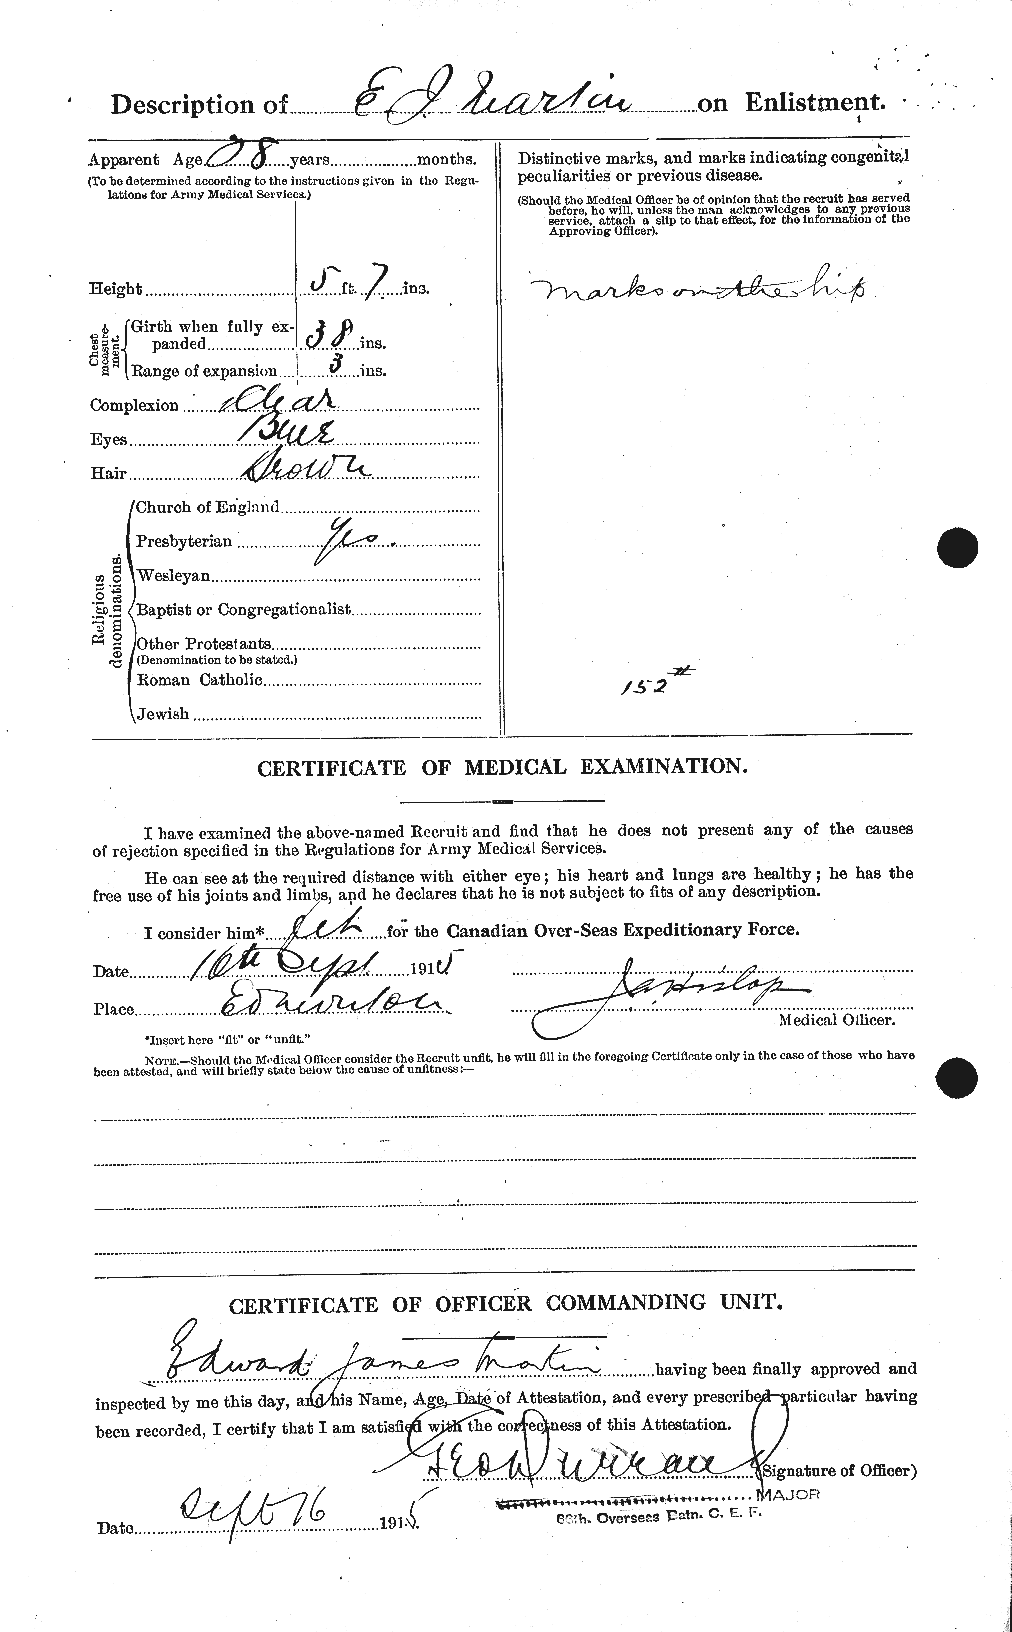 Personnel Records of the First World War - CEF 482881b